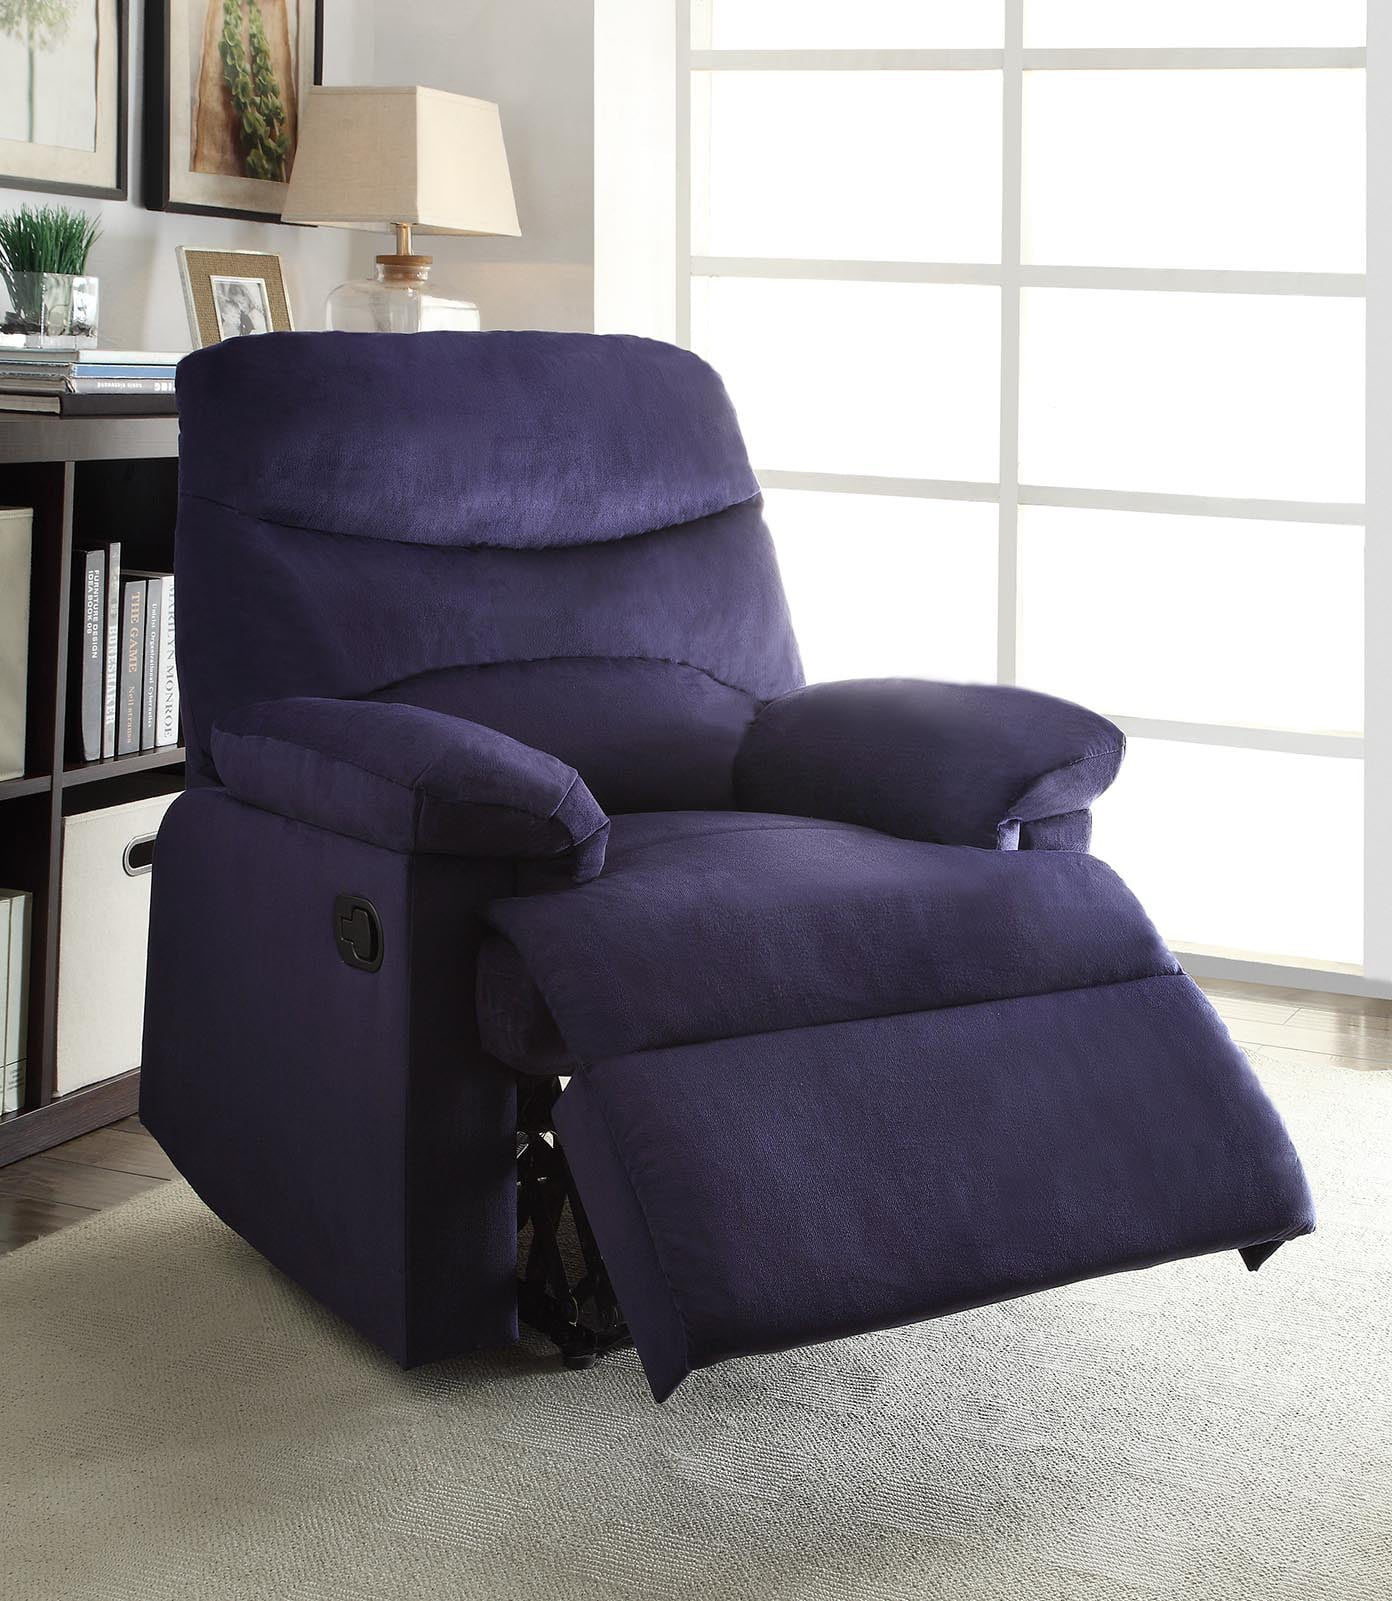 Picture of ACME 00700 Arcadia Recliner - Blue Woven Fabric